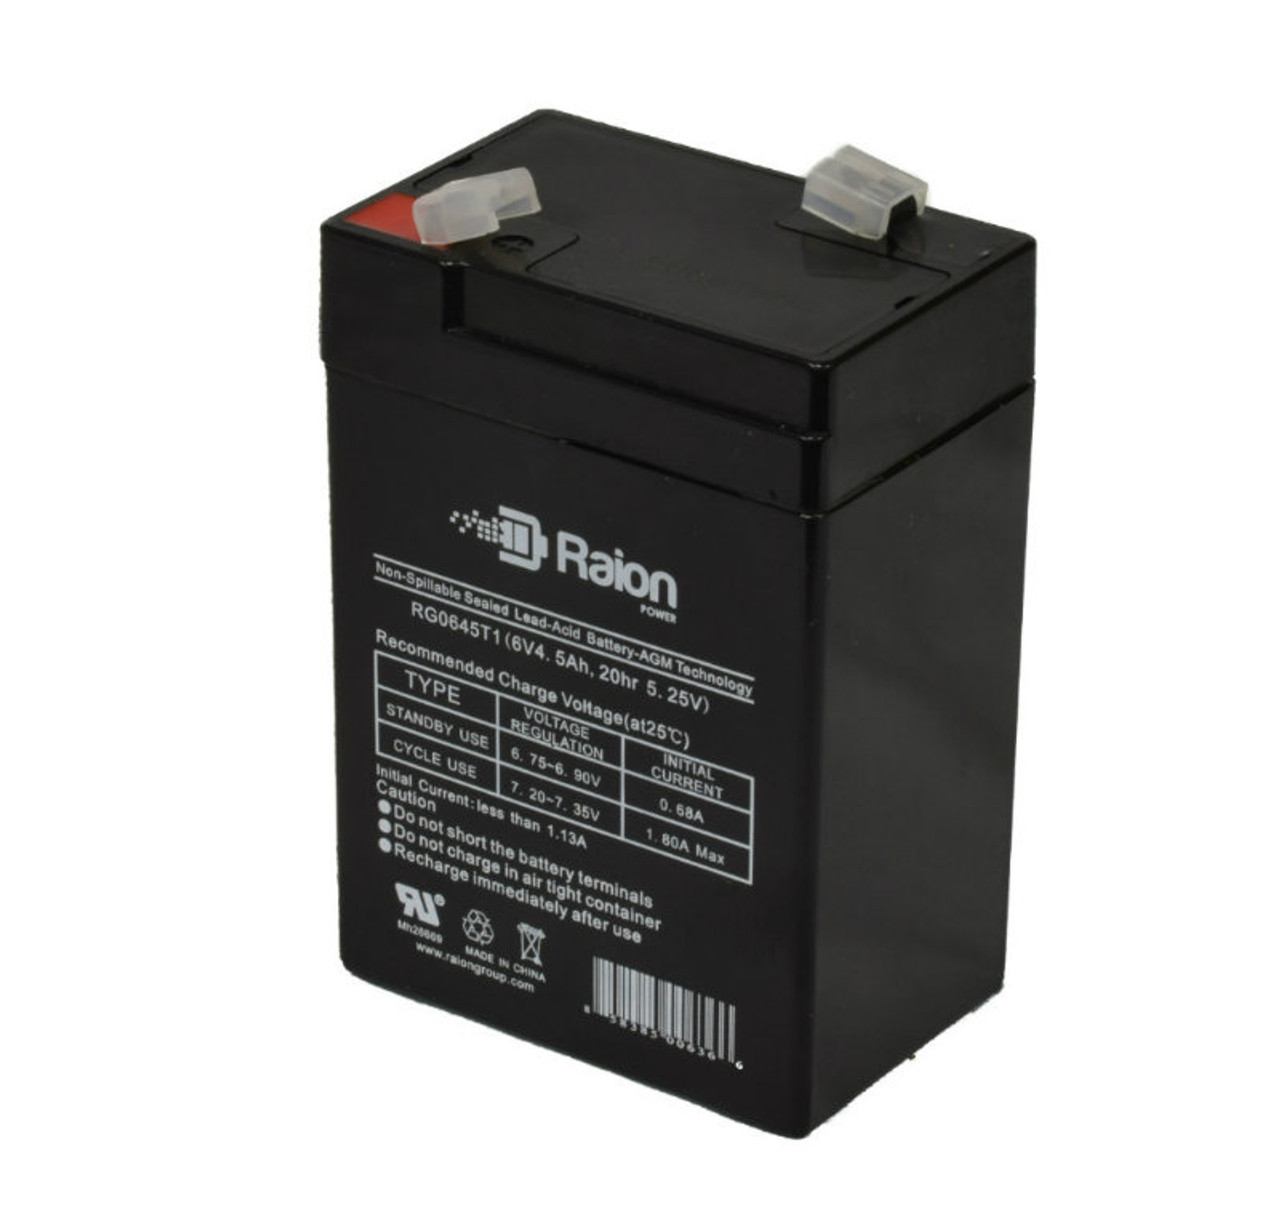 Raion Power RG0645T1 6V 4.5Ah Replacement Battery Cartridge for Light Alarms DS3